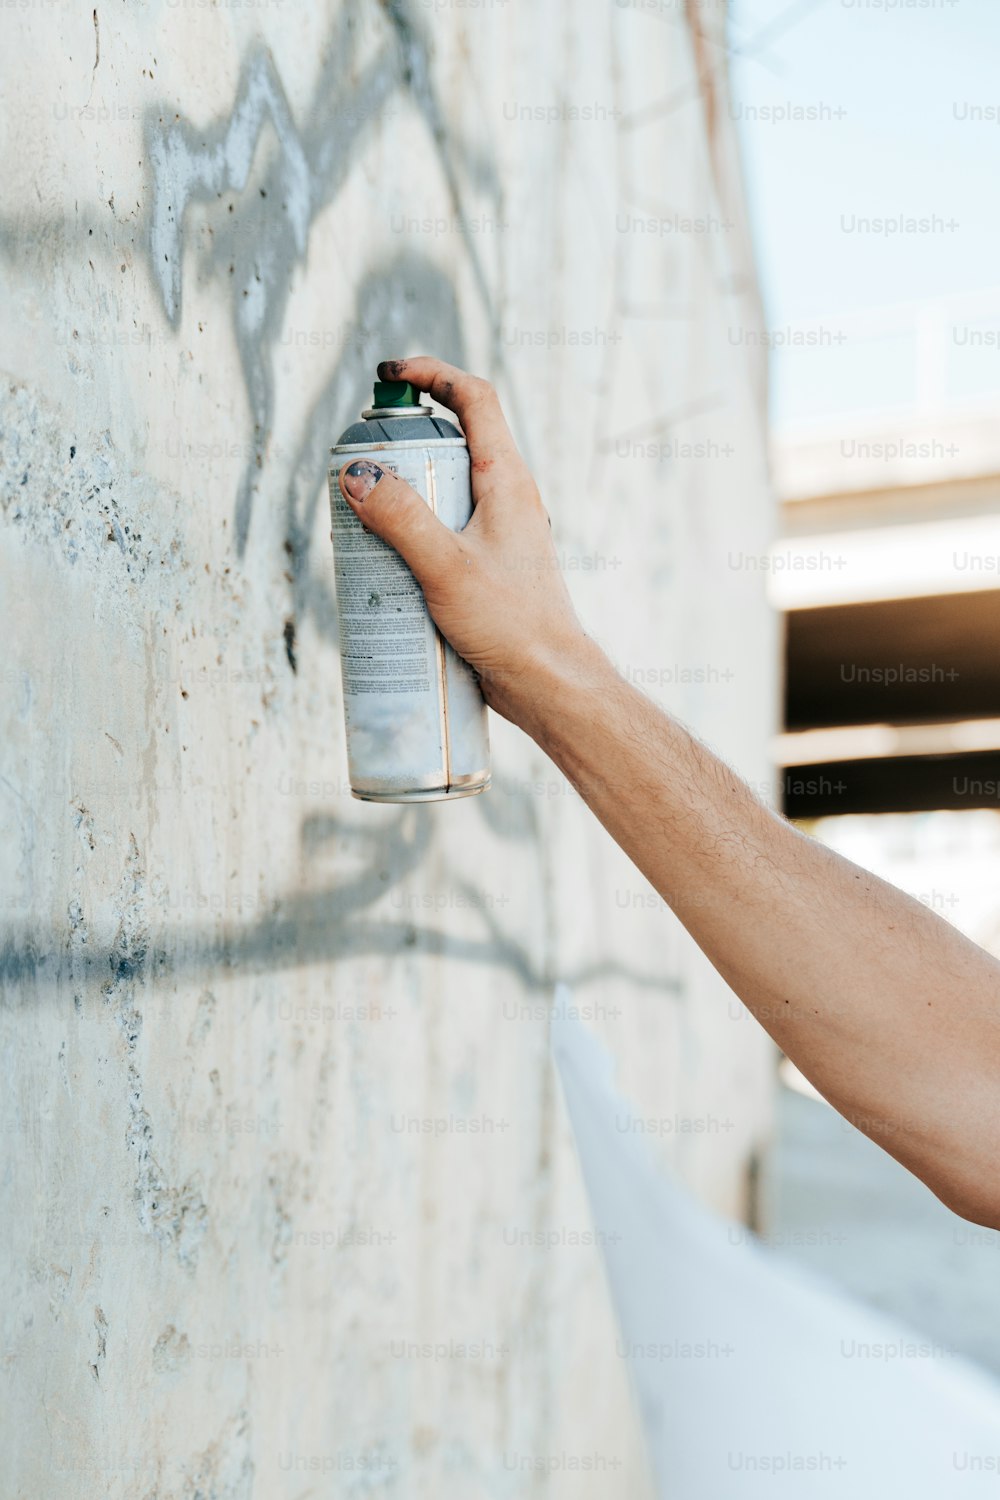 a person spray painting a wall with graffiti